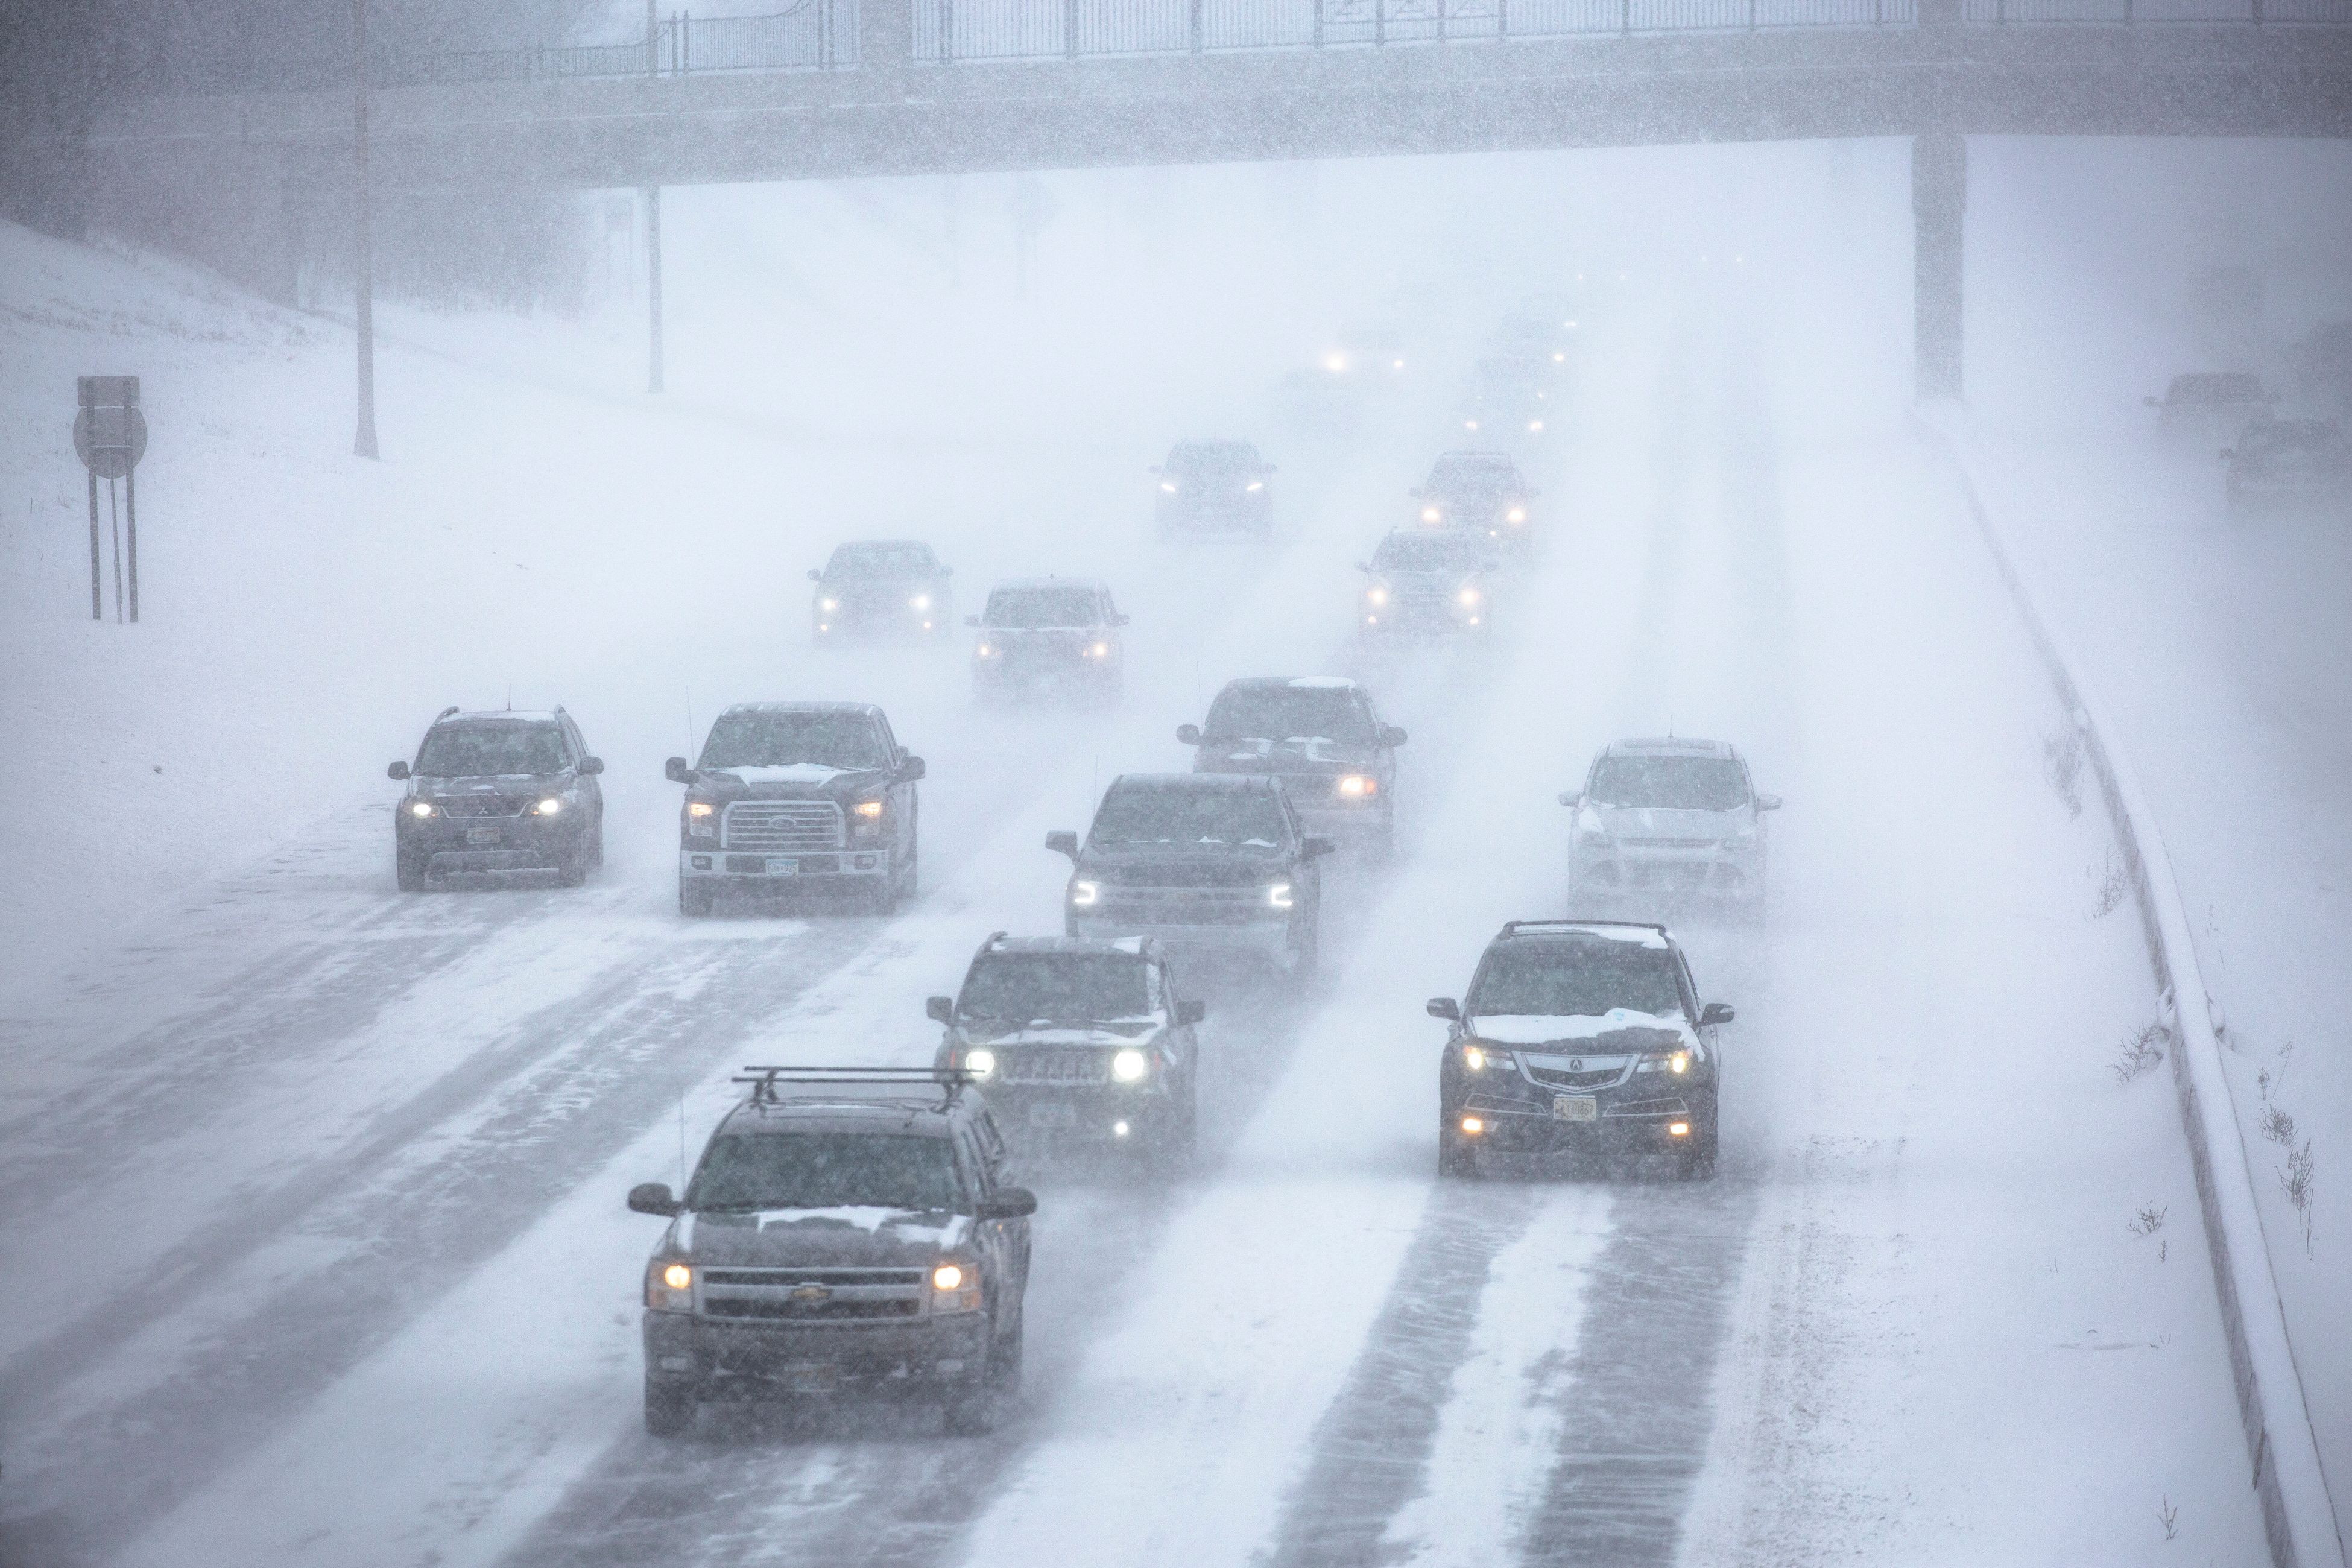 The map exhibits a “dangerous” winter storm affecting seven states